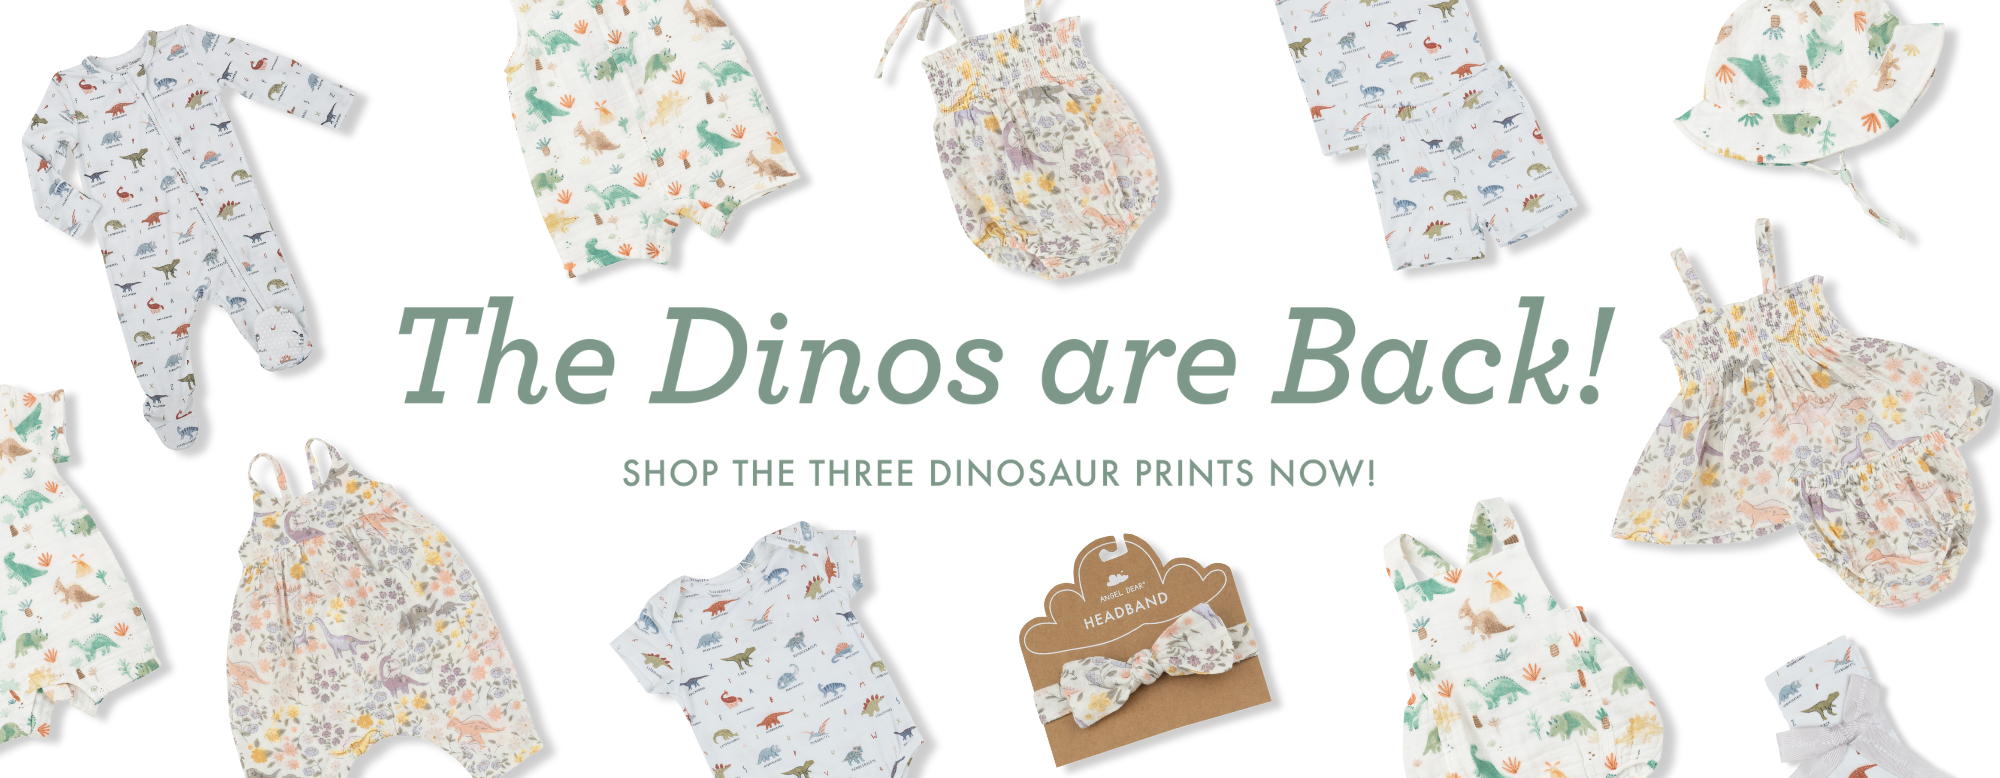 collage of baby clothing in dinosaur prints "The Dinos are Back!"